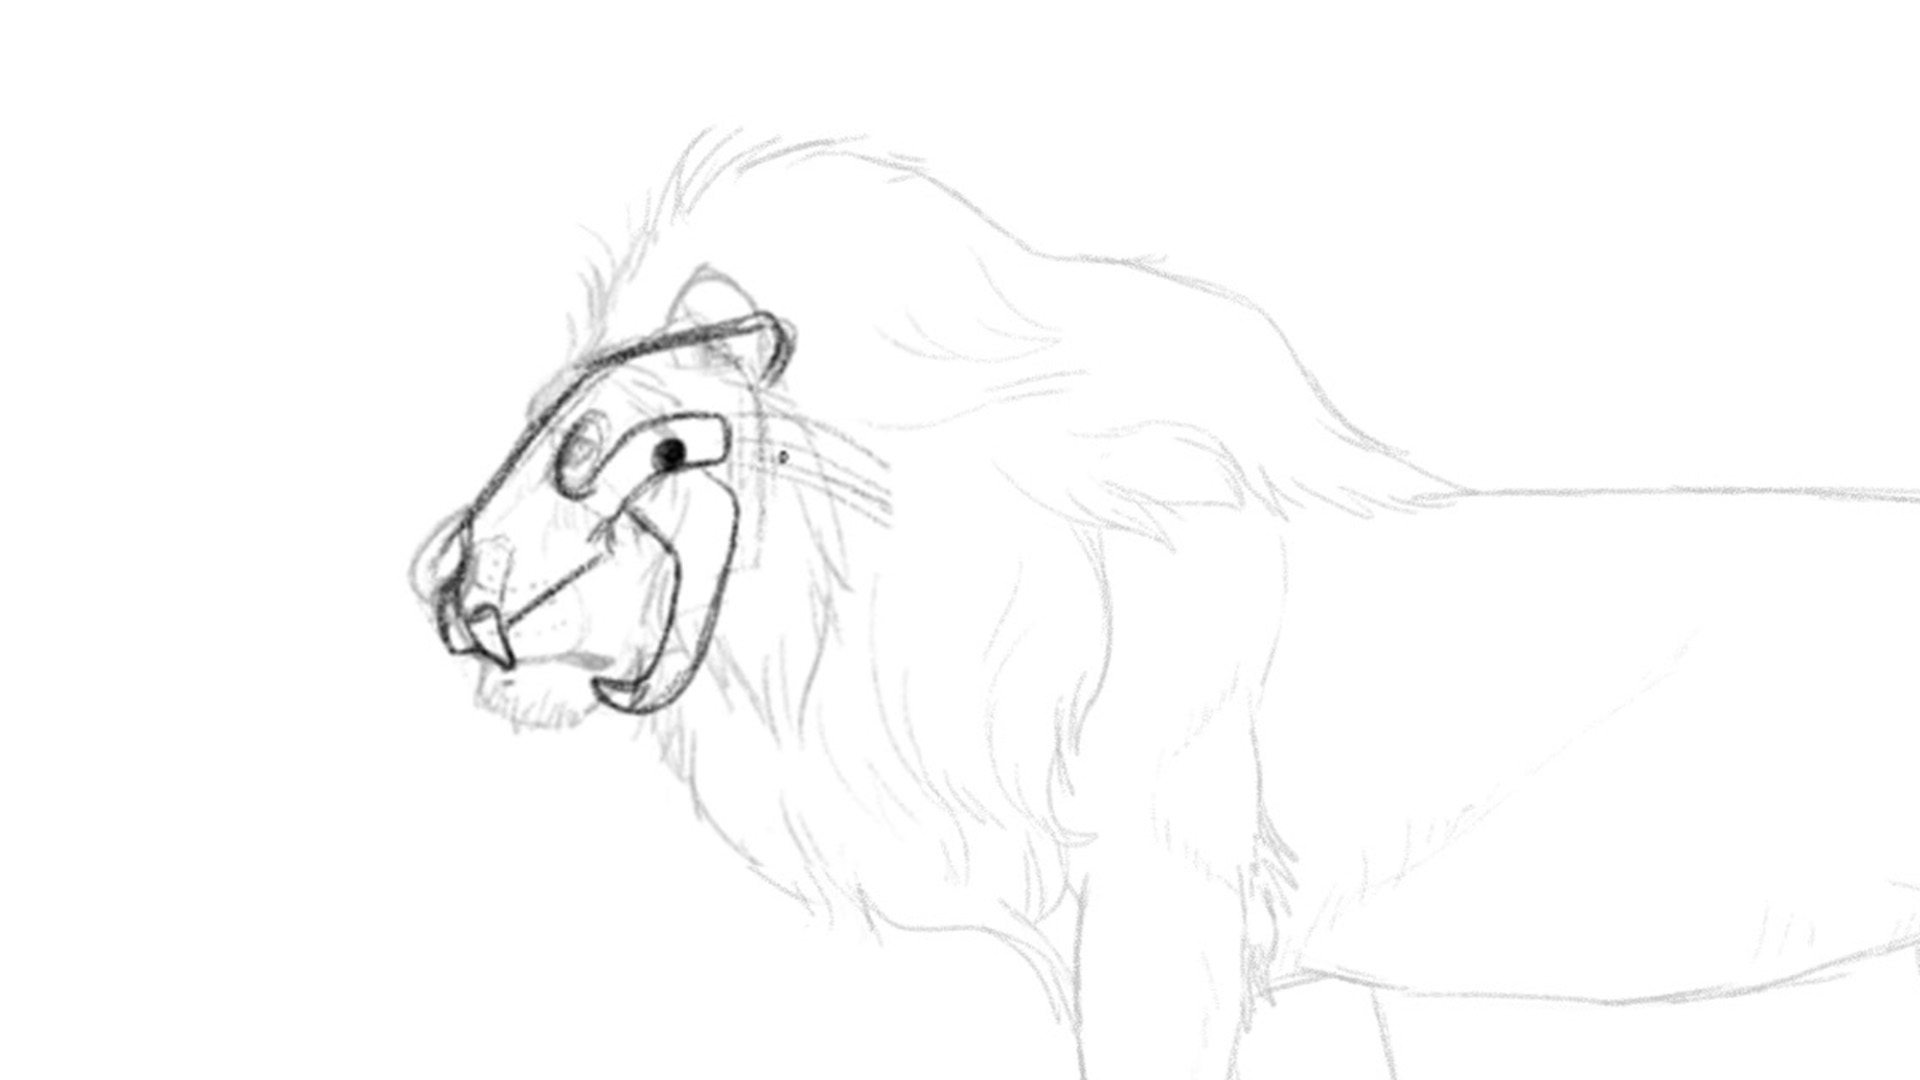 Simple Rough Sketch Drawing Of A Lion With Its Moutgh Open with Realistic